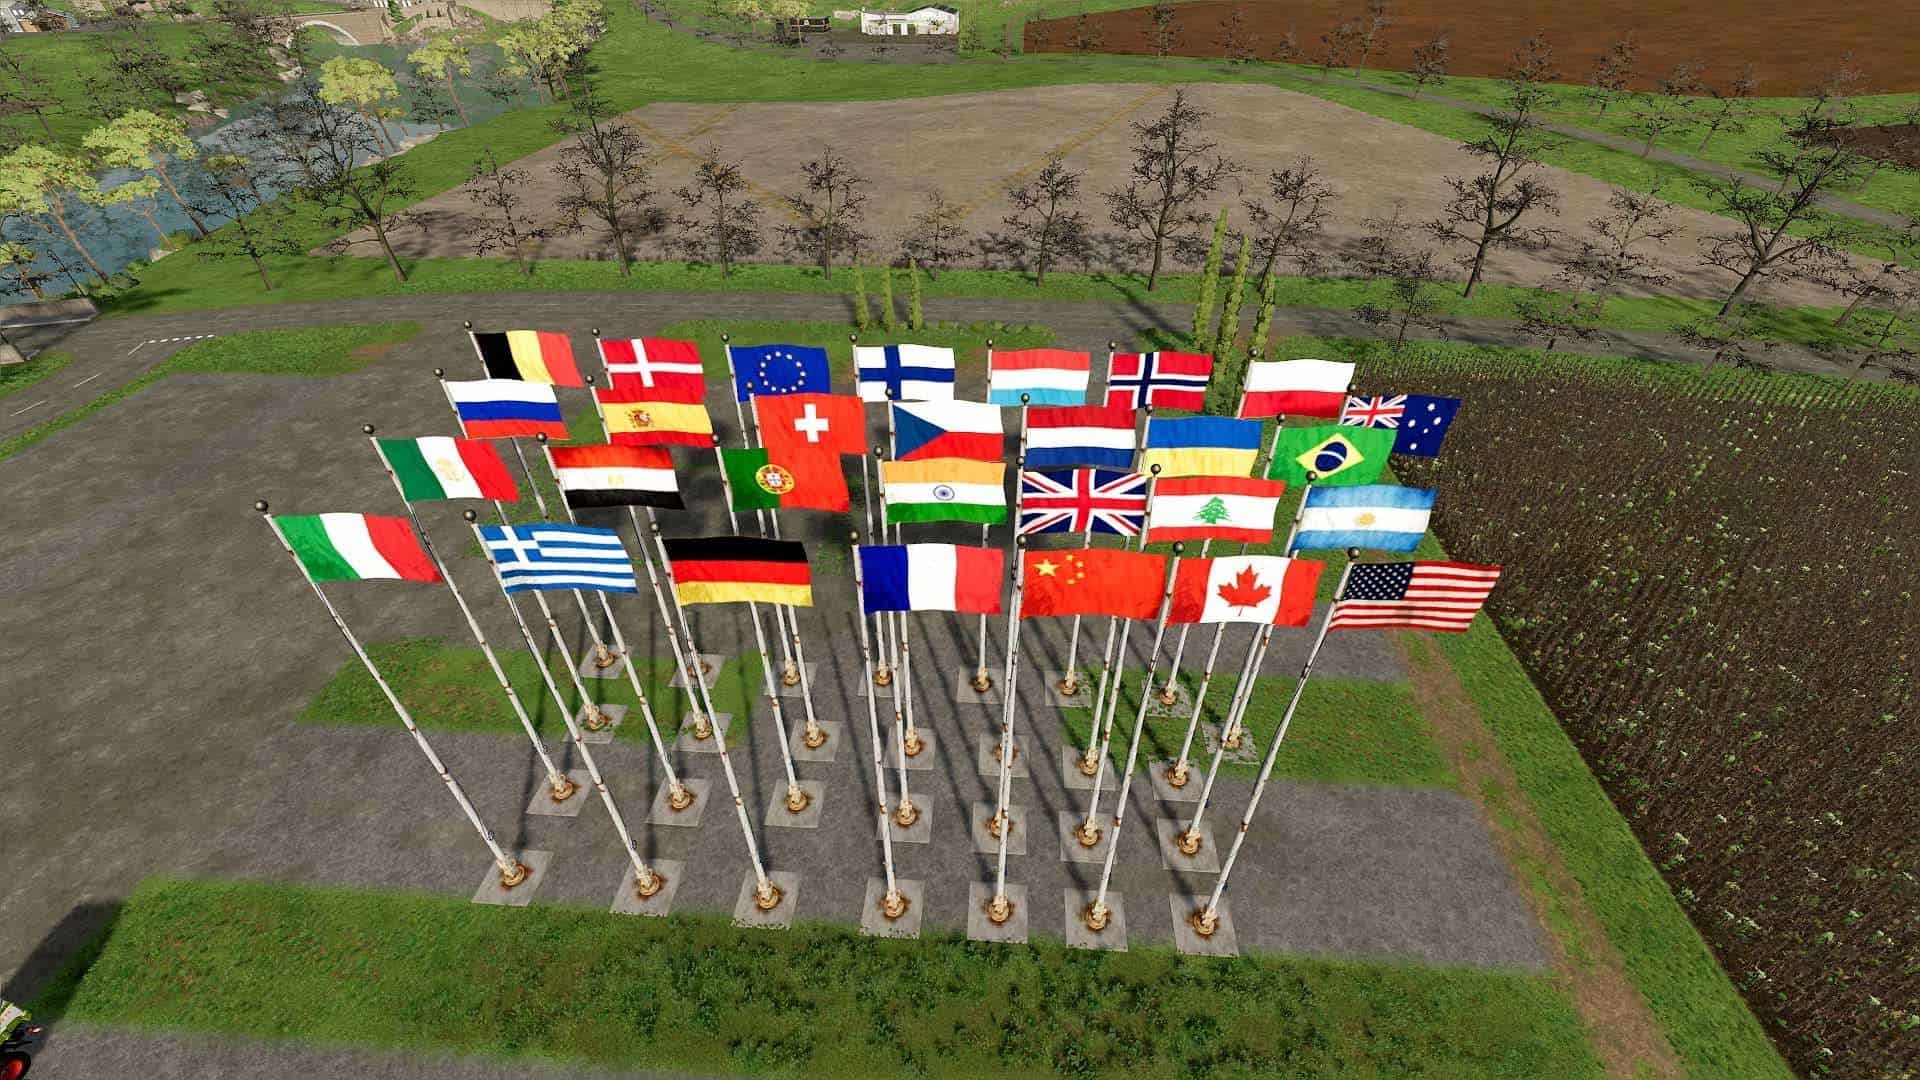 International Flags, Wide variety, Mod download, Flag collection, 1920x1080 Full HD Desktop